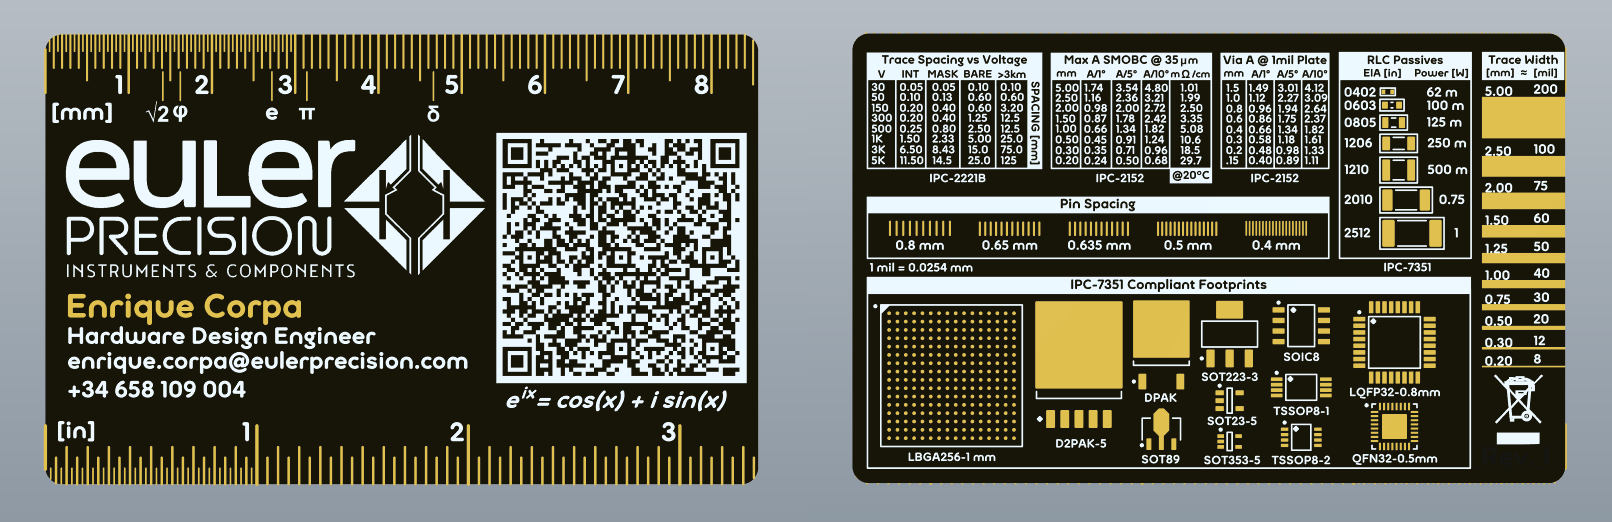 Our Engineering PCB Business Card